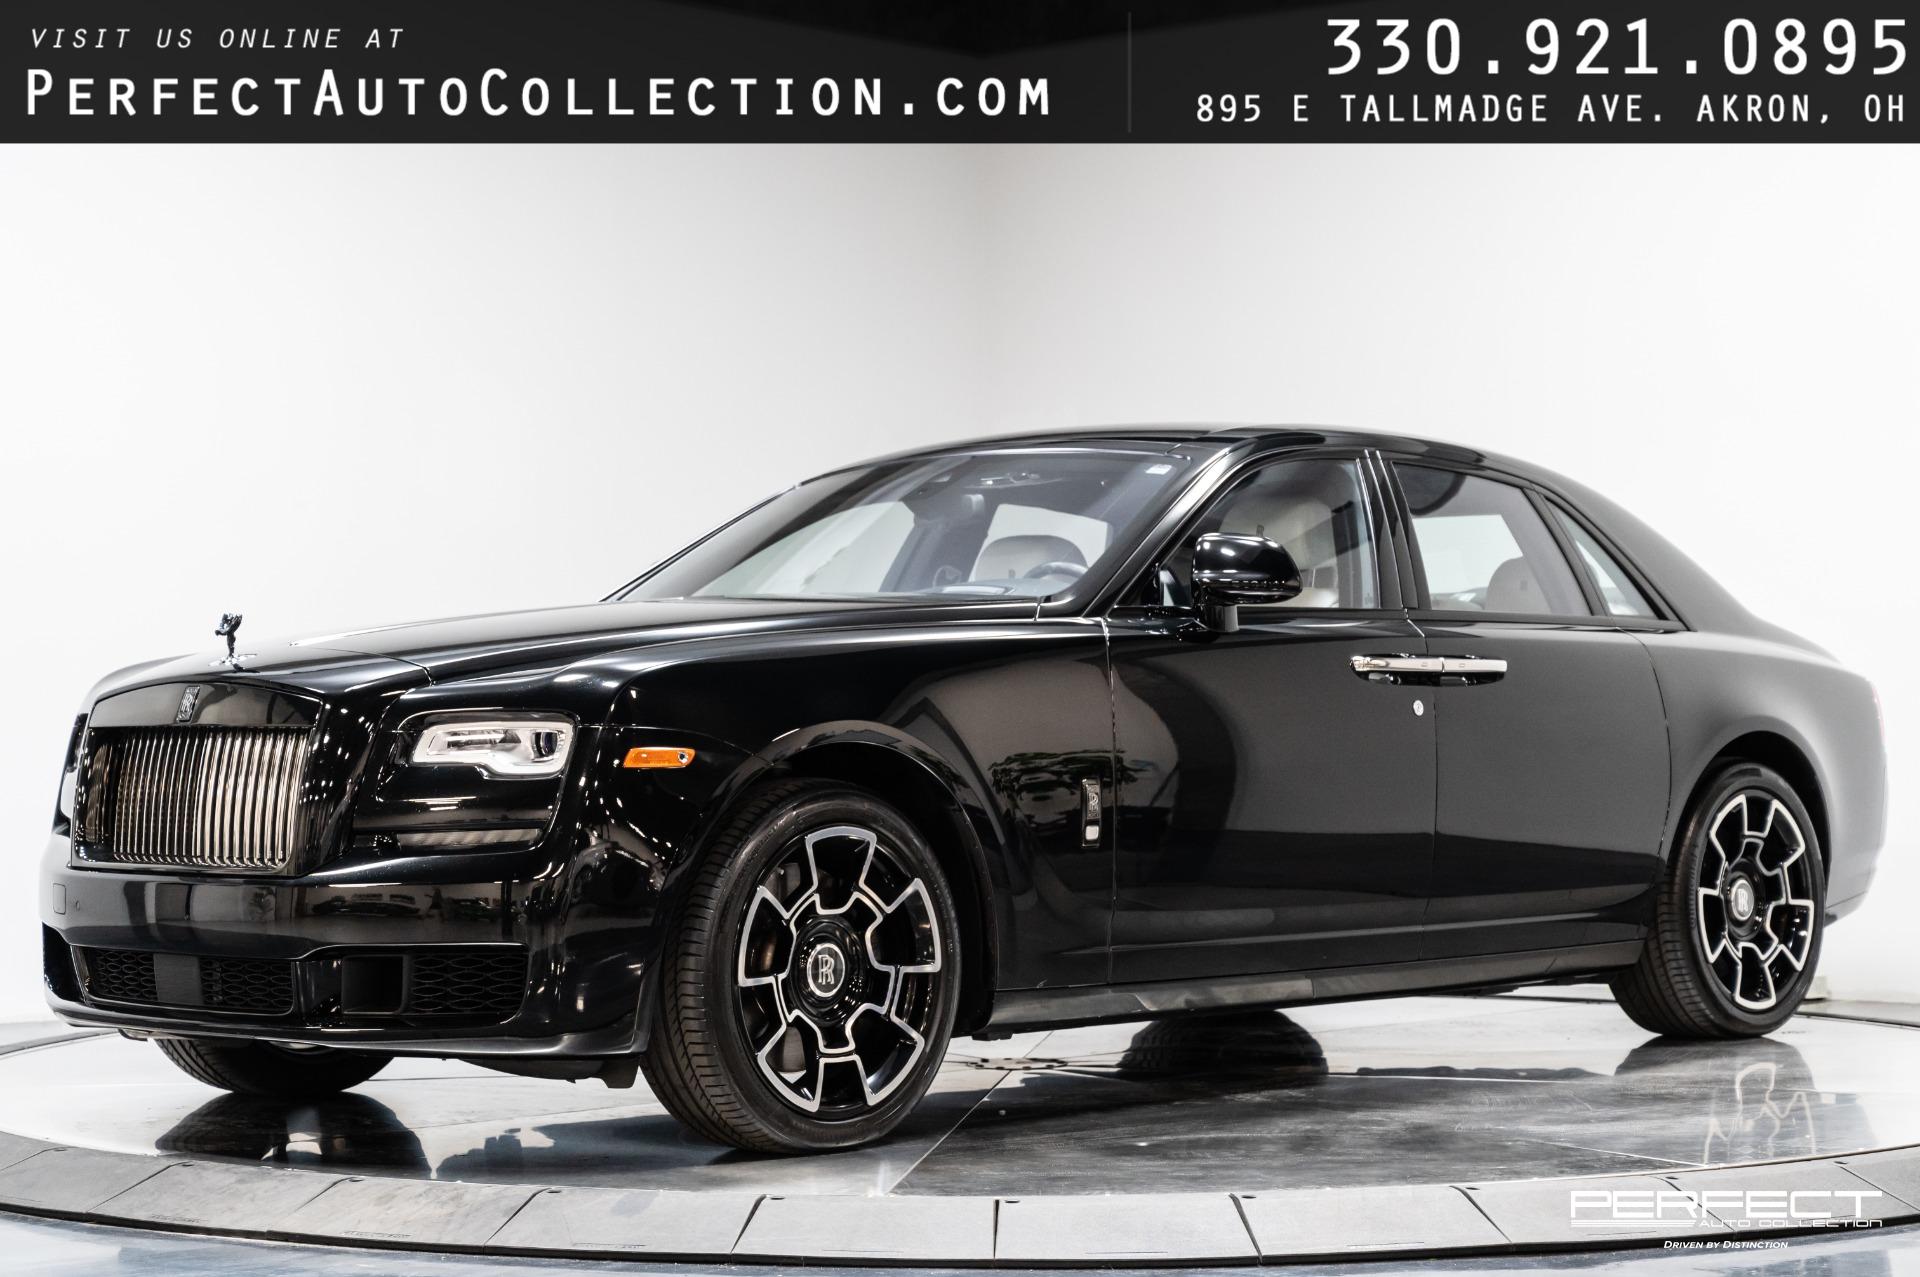 Used 2018 RollsRoyce Ghost Black Badge For Sale Sold  Perfect Auto  Collection Stock JUX54590